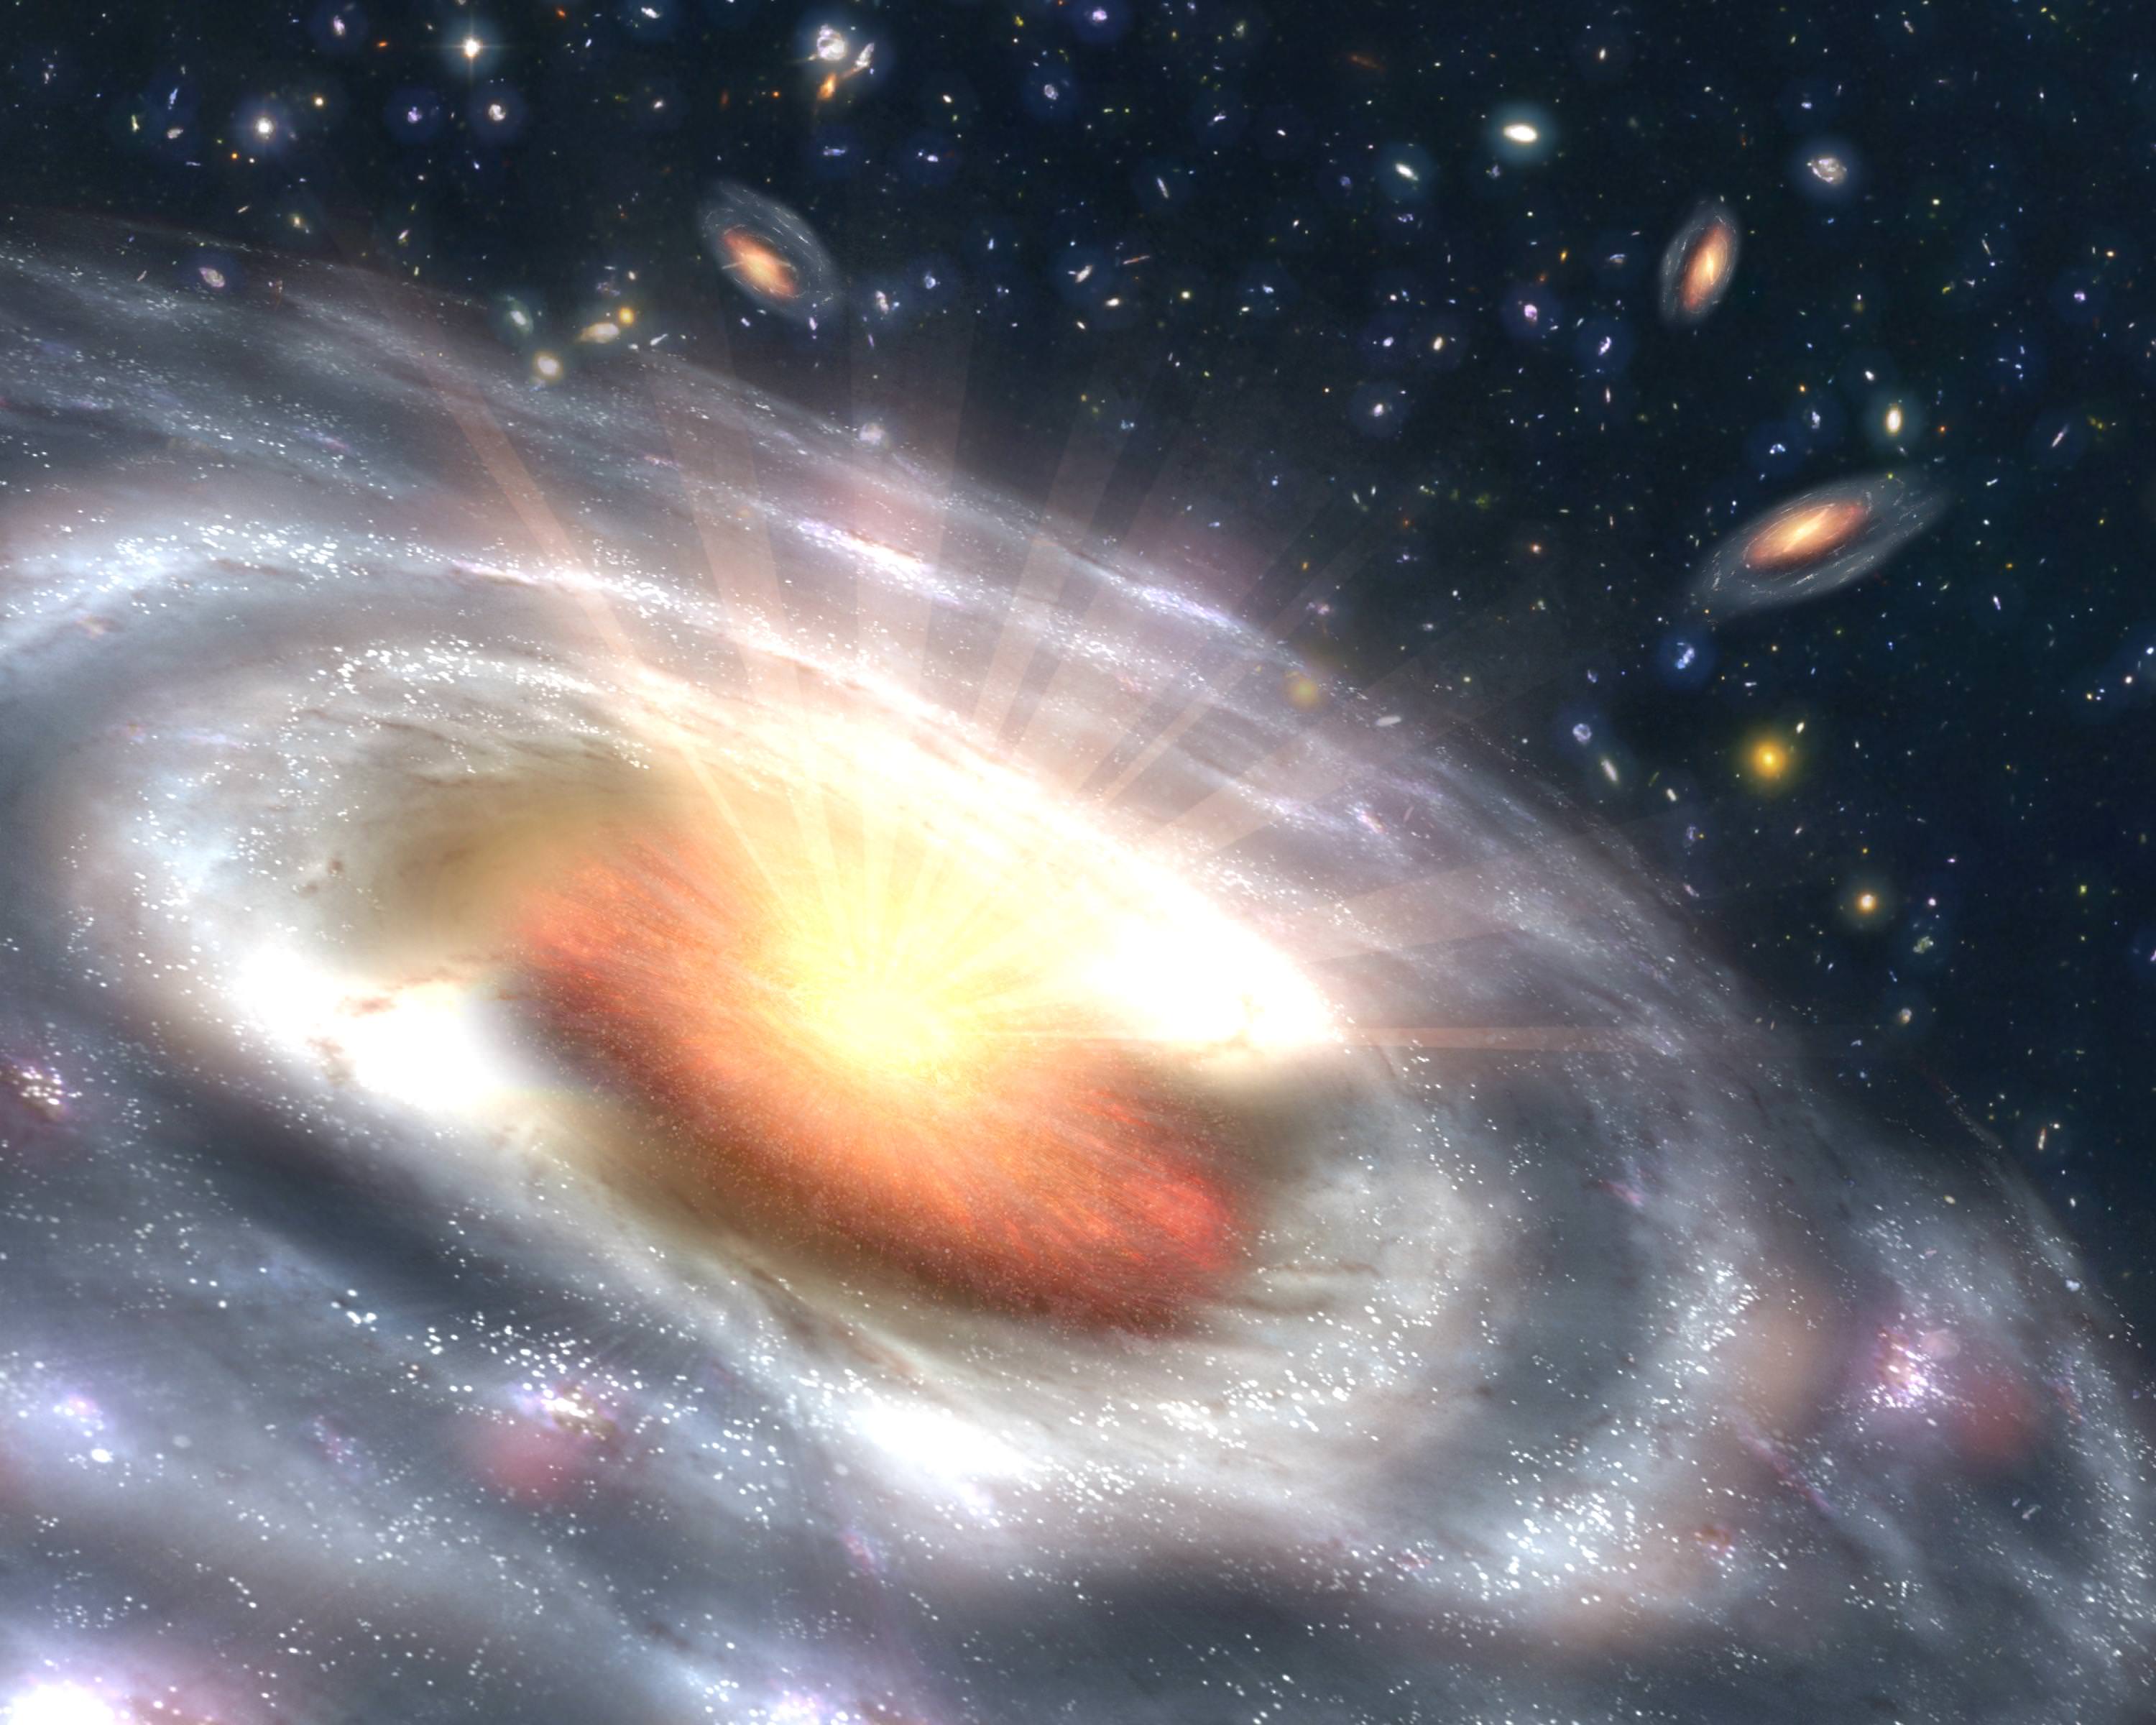 10 Amazing Facts About Black Holes - Universe Today